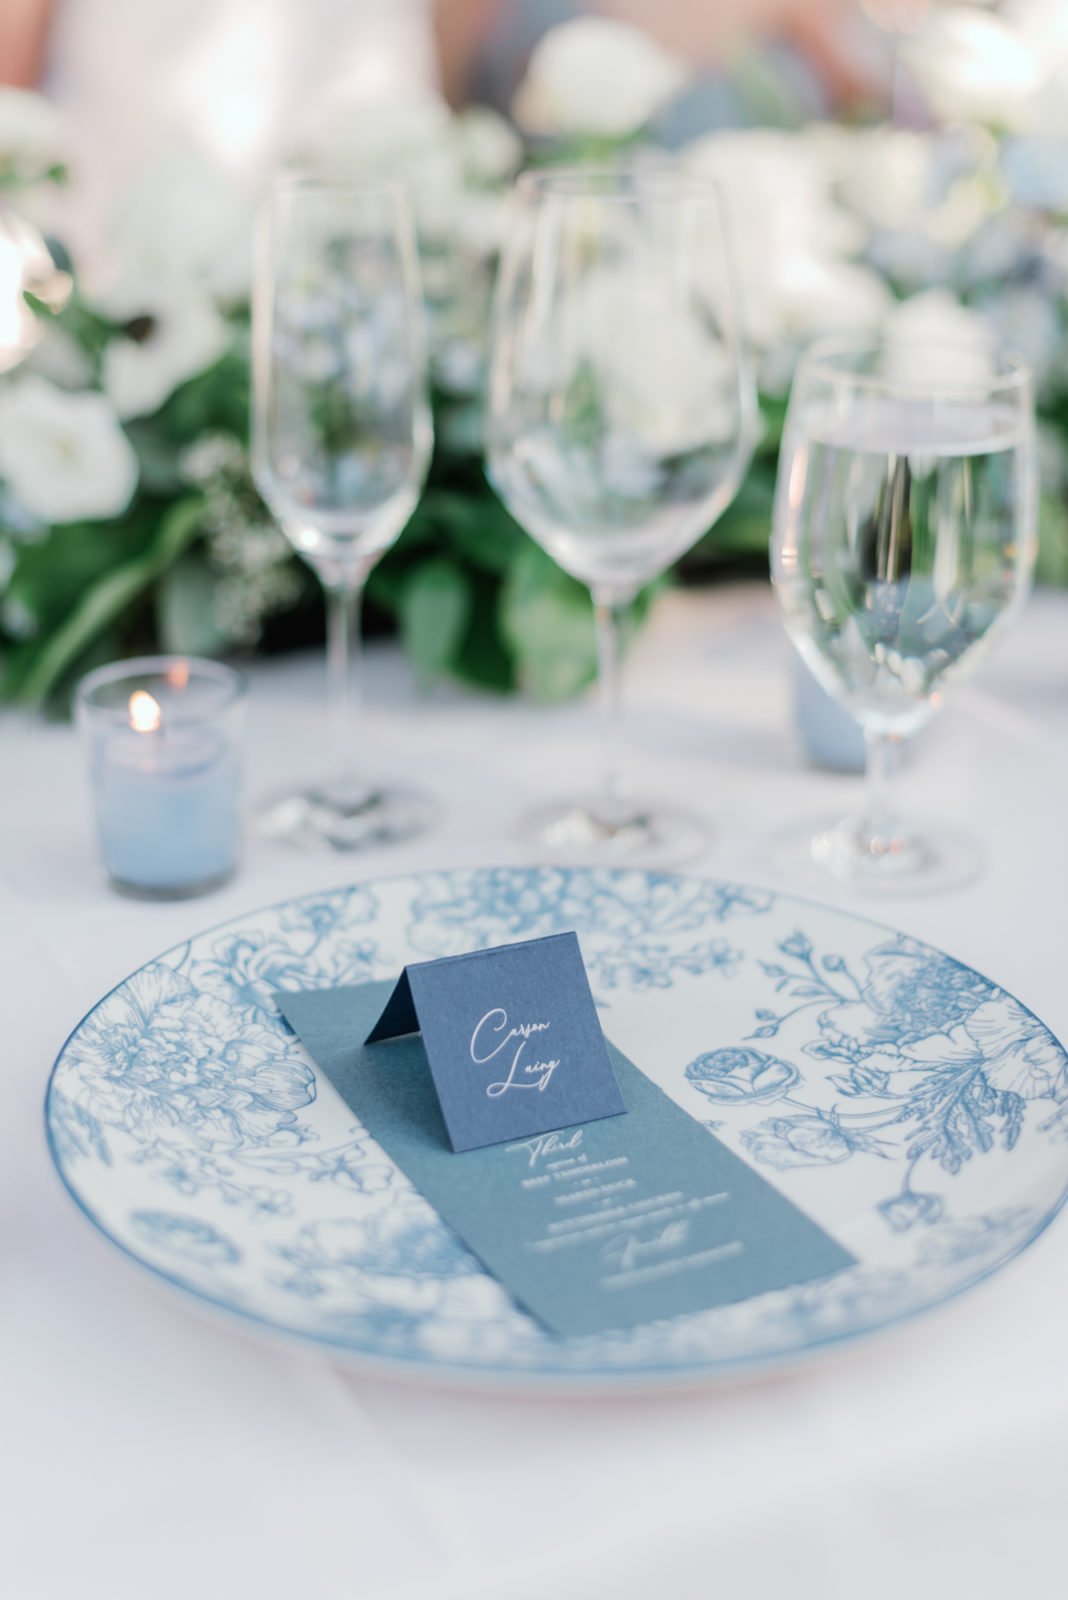 Pale blue and white table settings for a classy wedding reception